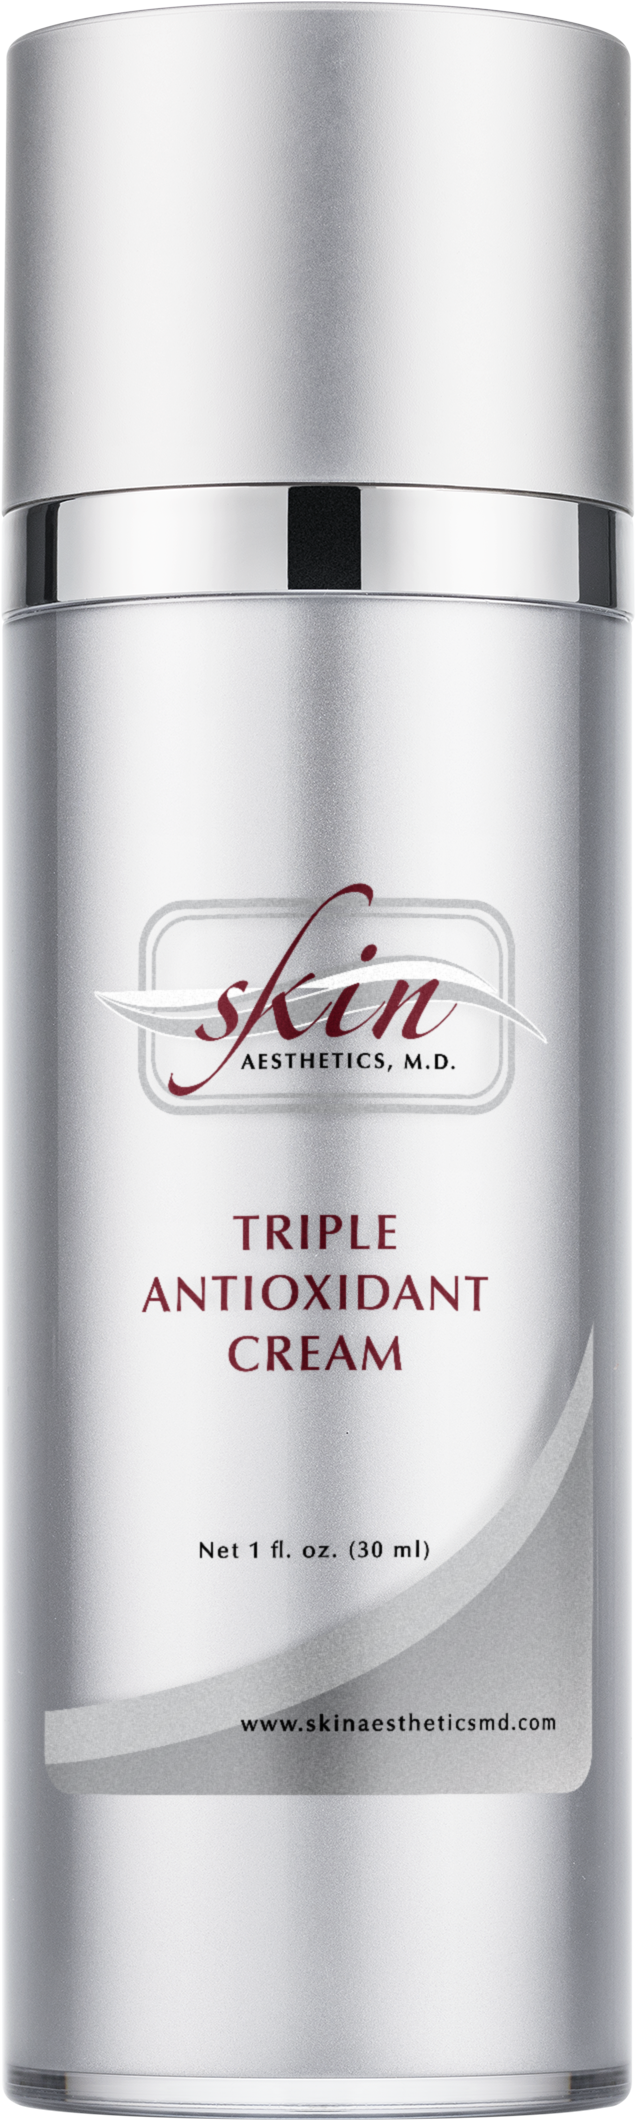 Triple Antioxidant Cream-Spa361 at The Dermatology and Skin Cancer Institute